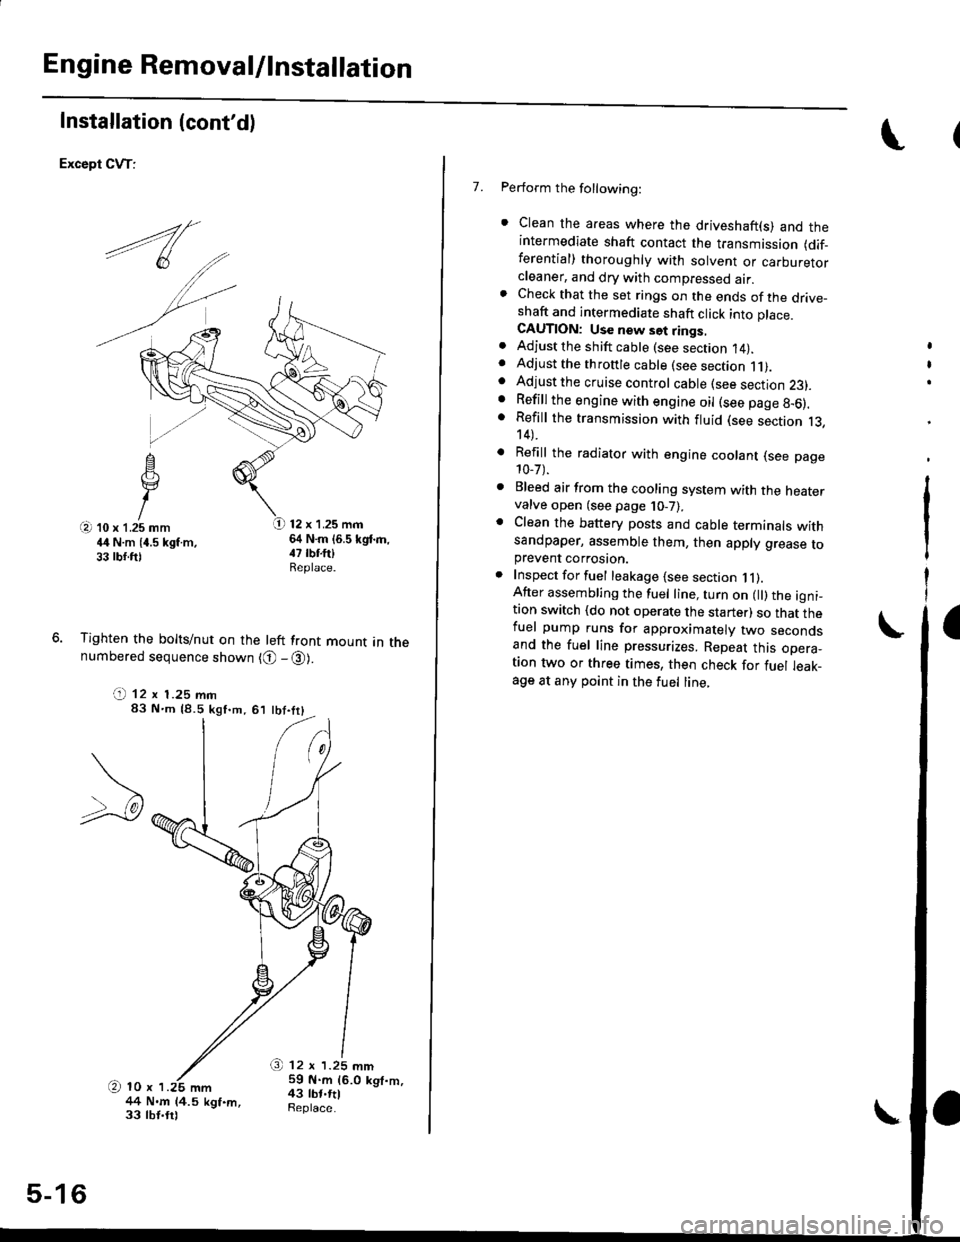 HONDA CIVIC 1997 6.G Repair Manual Engine Removal/lnstallation
Installation (contd)
Except CVT:
12 x 1.25 mm64 N.m (6.5 kgd.m,
Tighten the bolts/nut on the left front mount in thenumbered sequence shown {O - @).
(t 12 x 1.25 mm83 Nm 